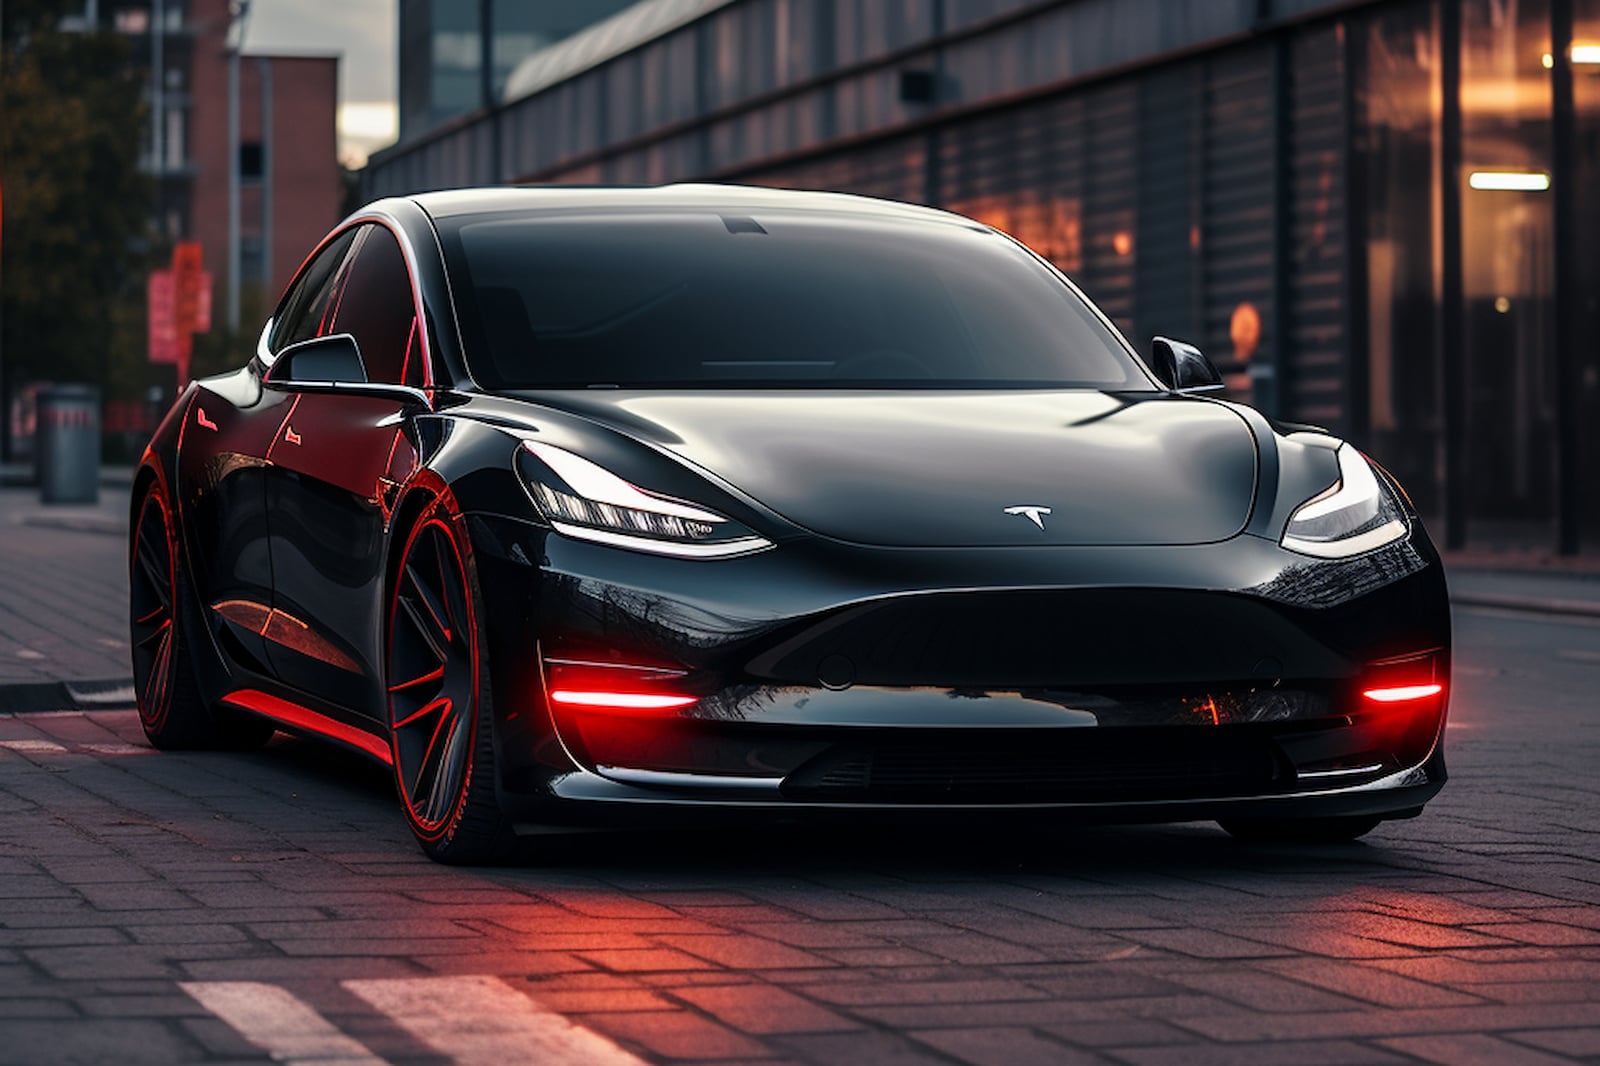 Tesla Shares Insights on the New Model 3 Performance's Design